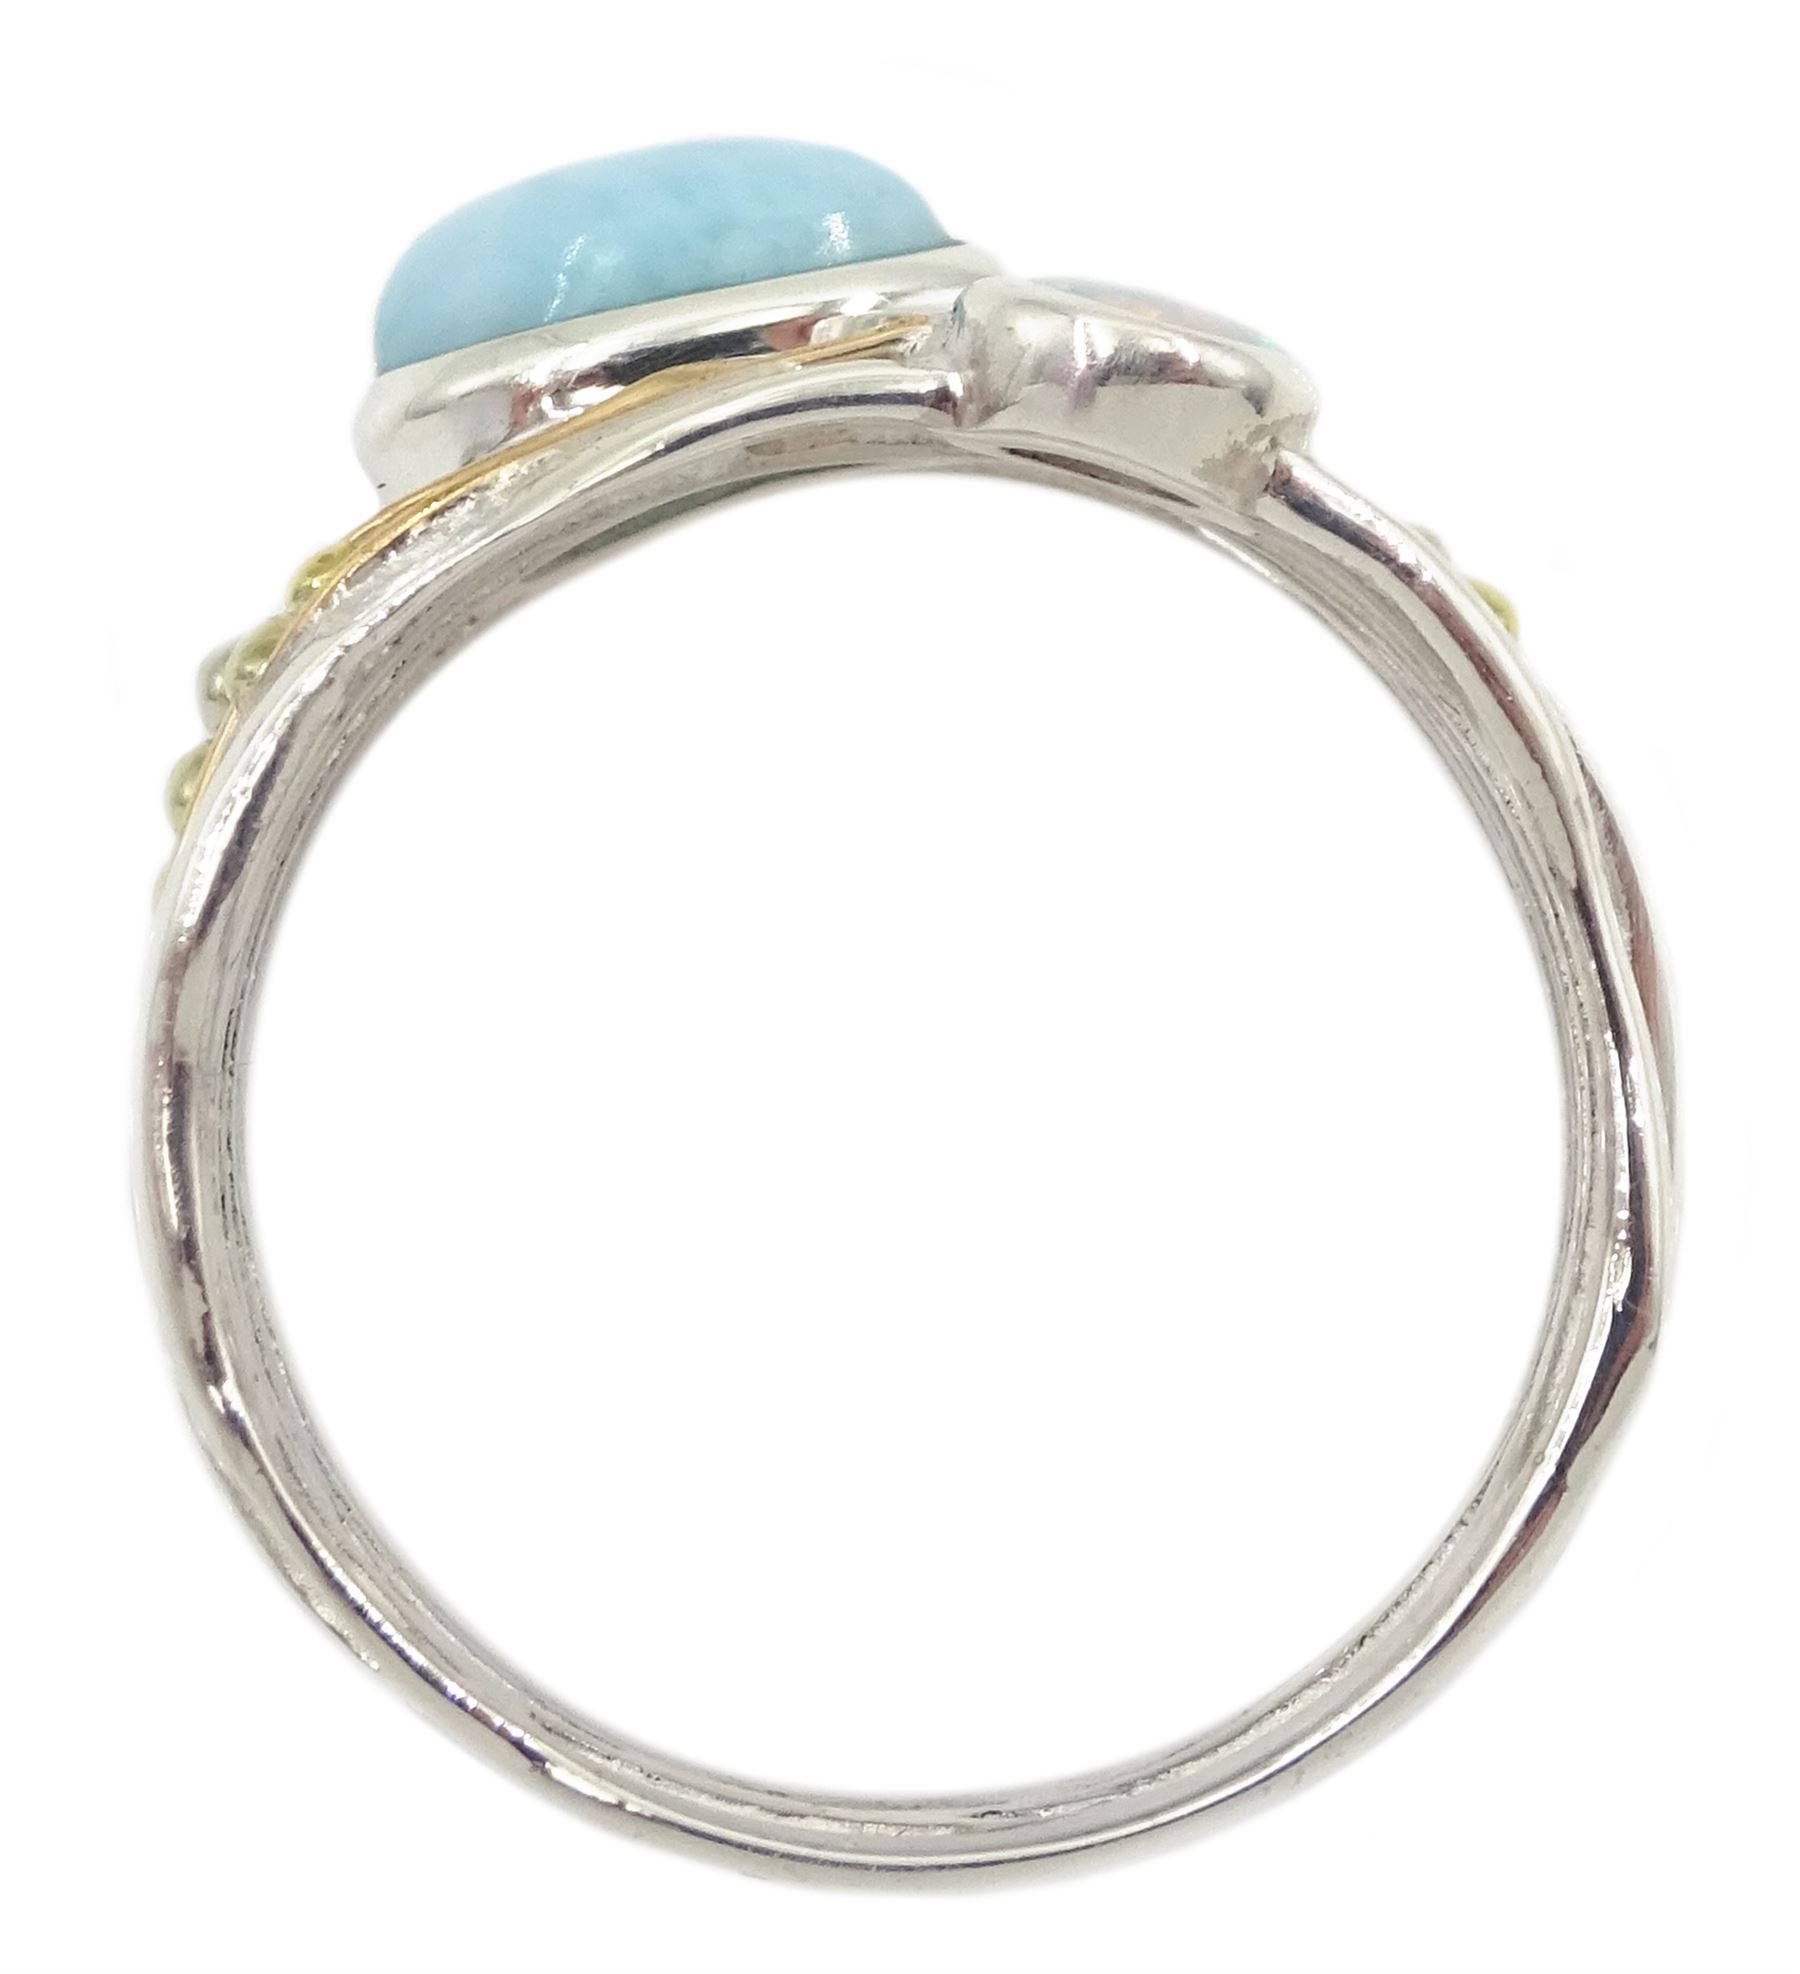 Silver and 14ct gold wire opal and larimar ring - Image 4 of 4